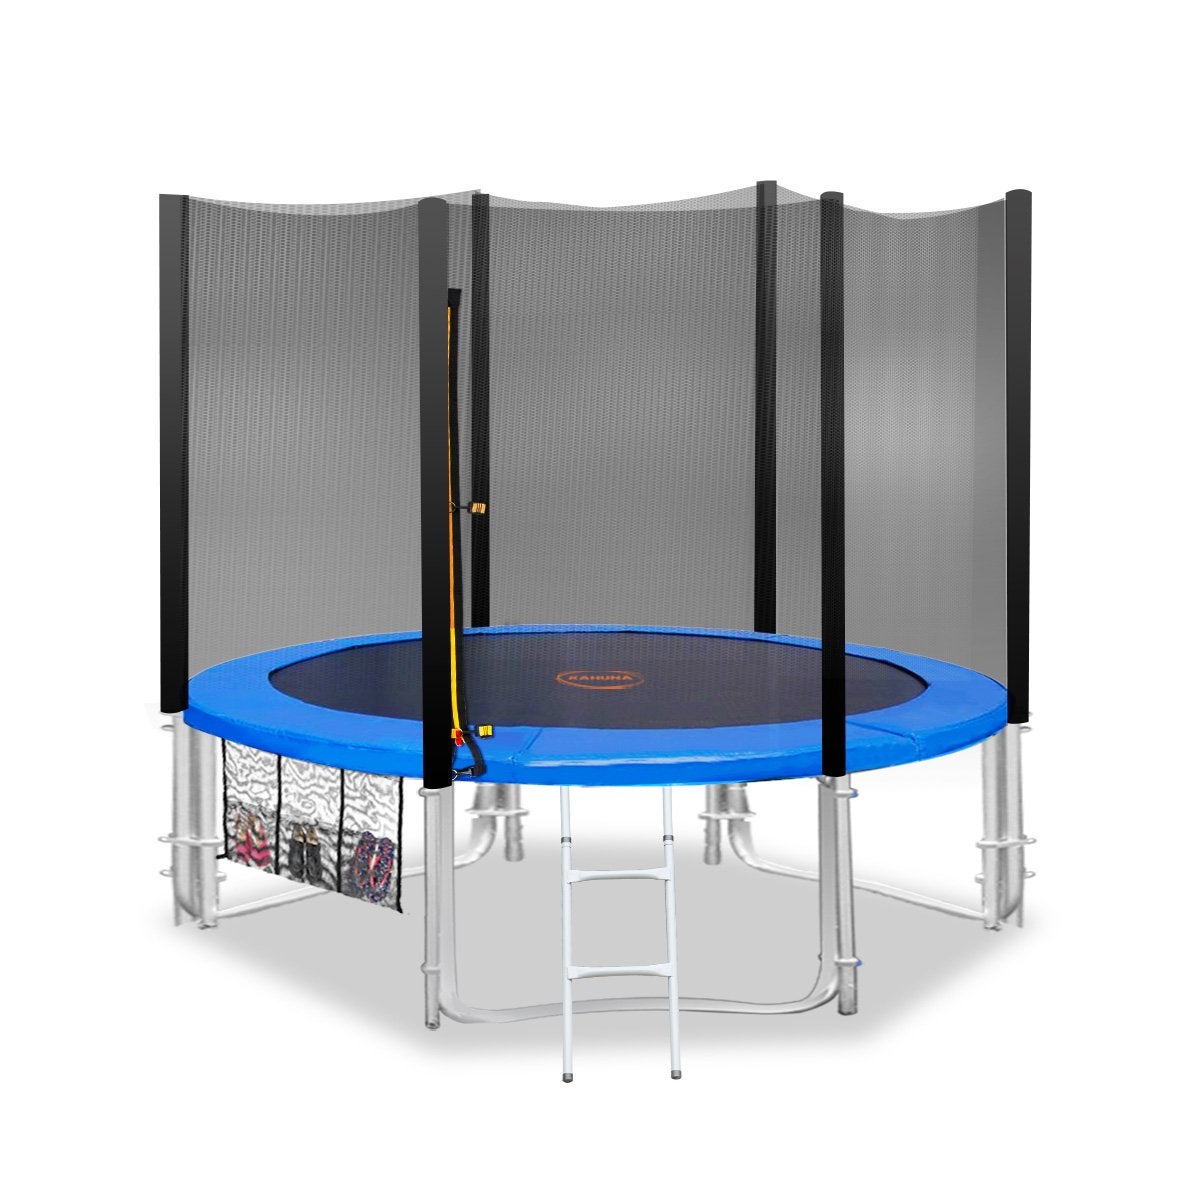 Blizzard 8 Ft Trampoline With Net - Blue